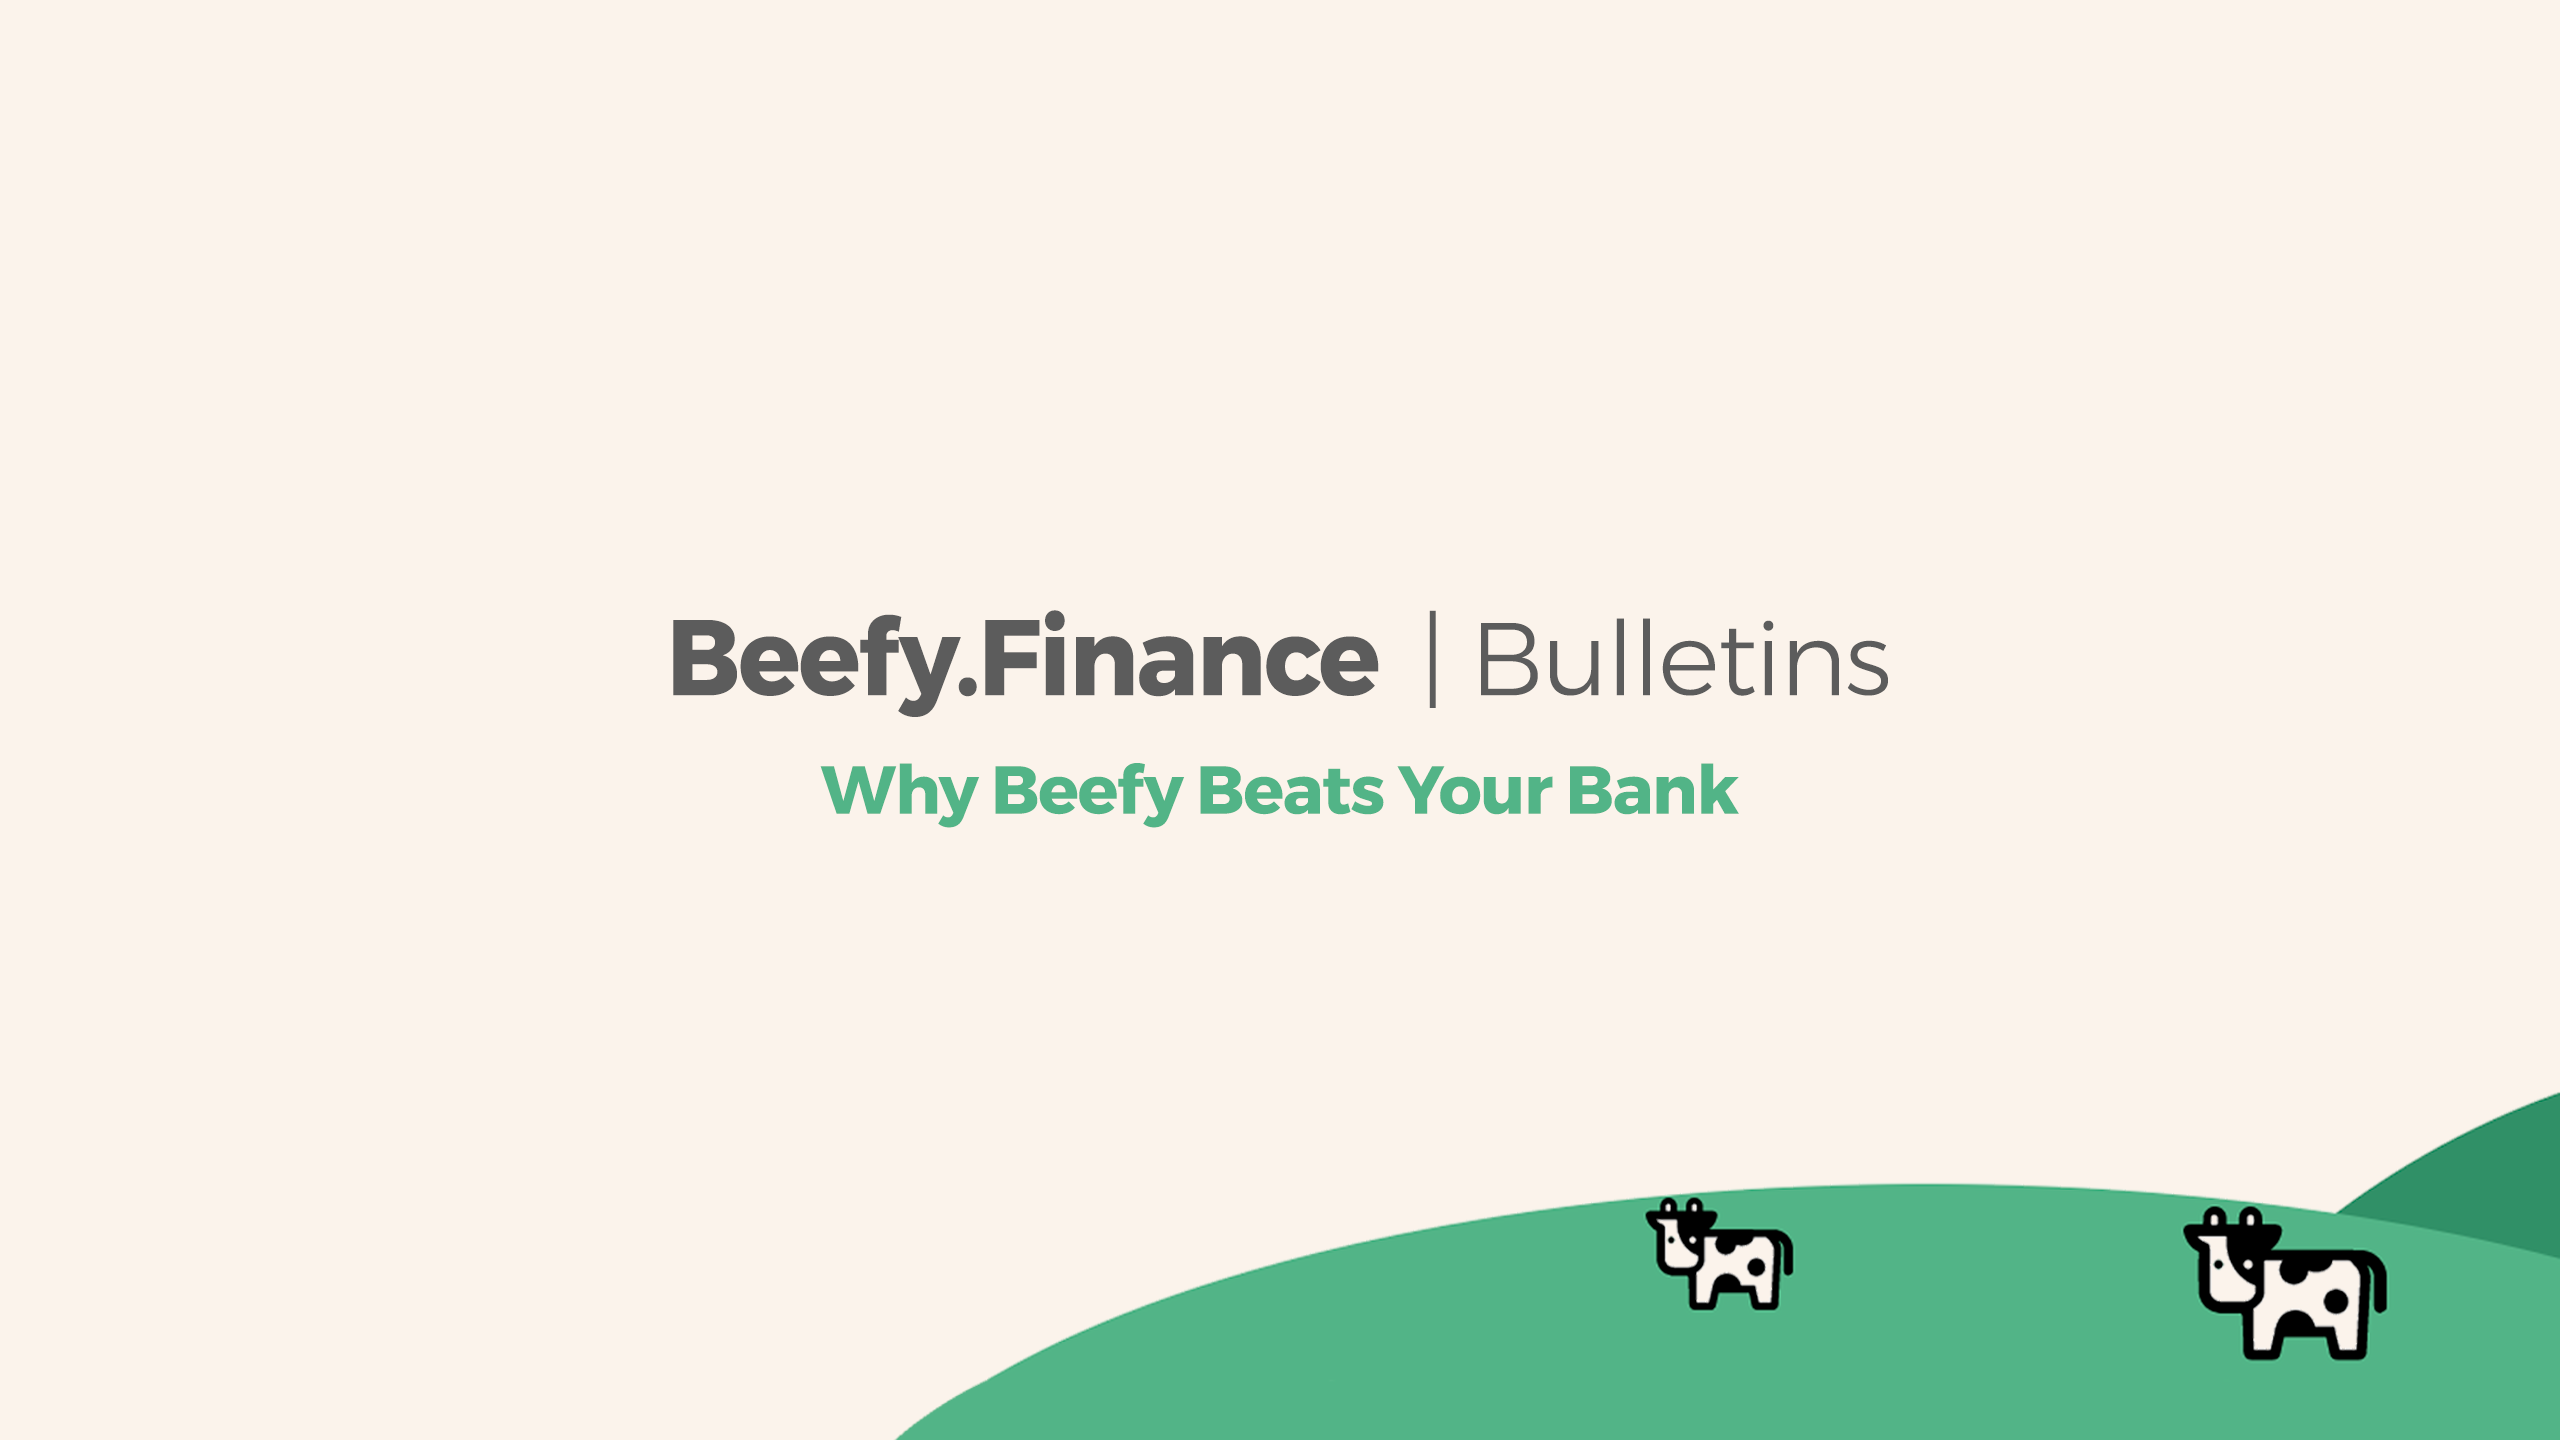 Why Beefy Beats Your Bank - Beefy.Finance